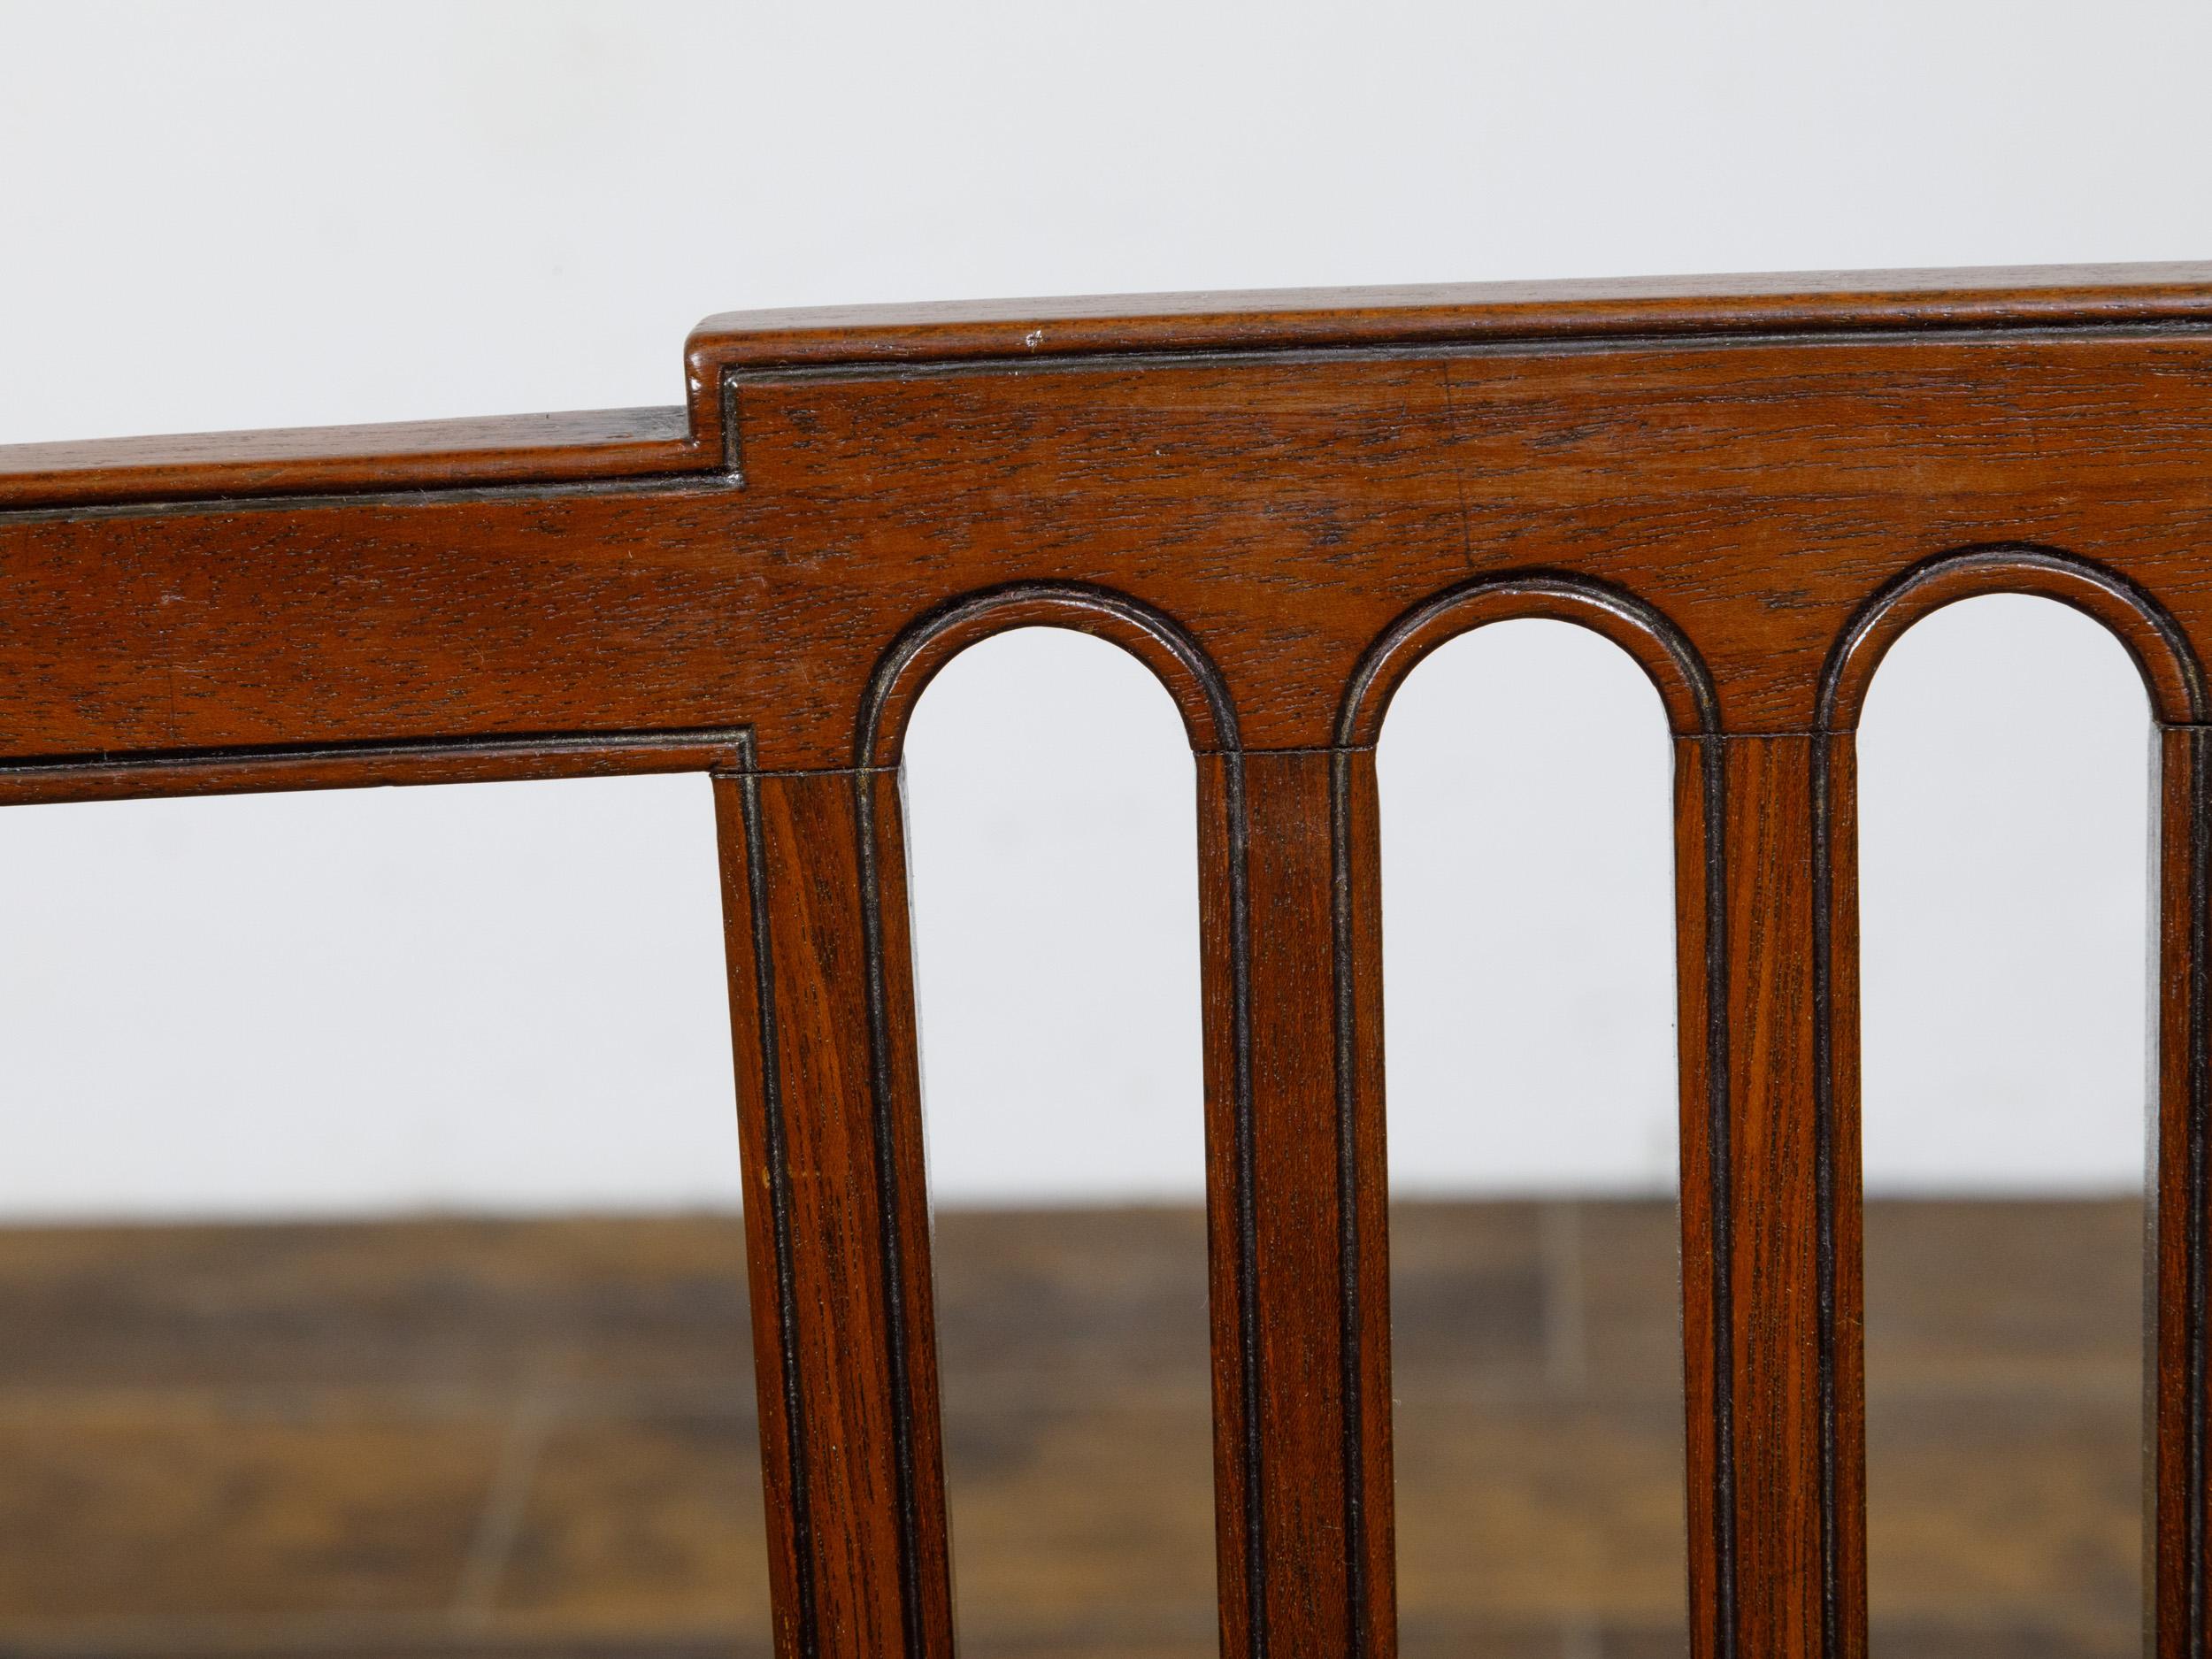 Pair of English Early 19th Century Plank Seat Chairs with Scrolling Arms For Sale 4